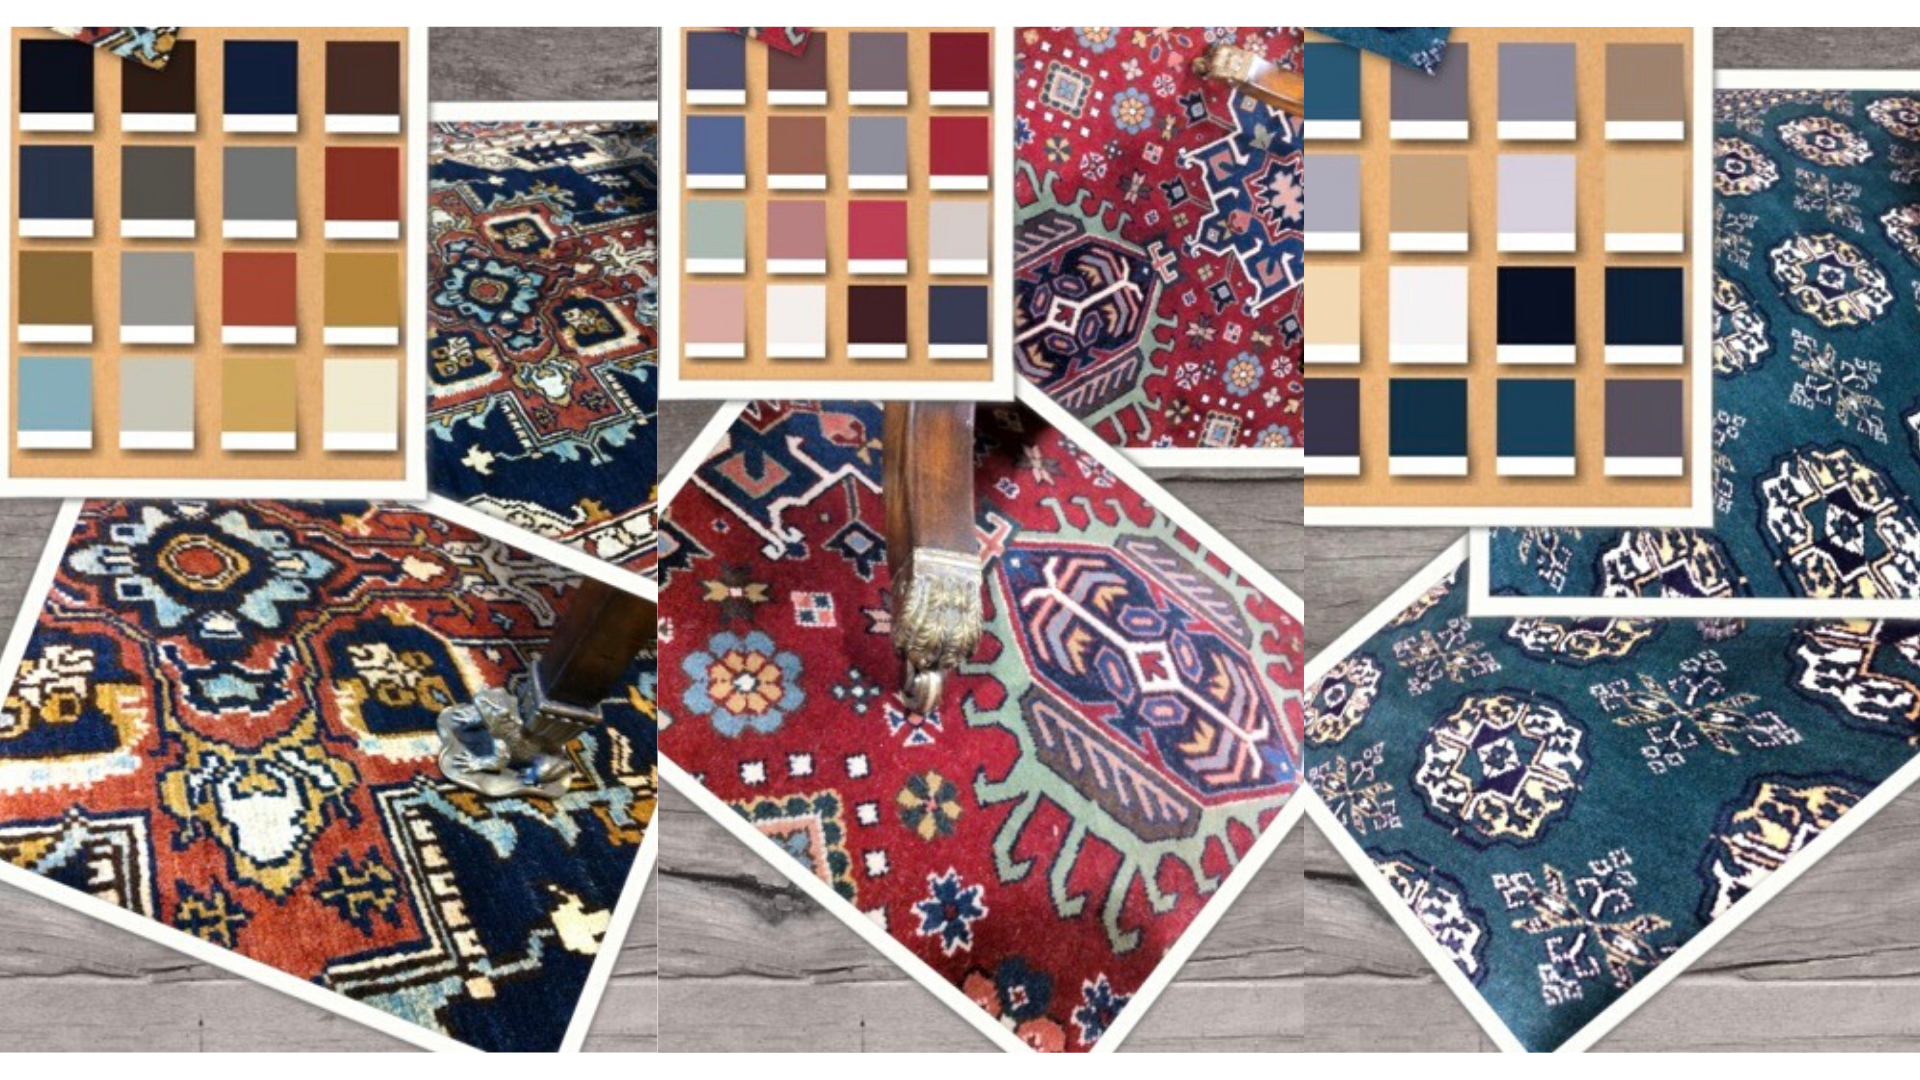 colour palette, persian rugs, oriental rugs, london rugs, uk rug collections, interior design, design ideas